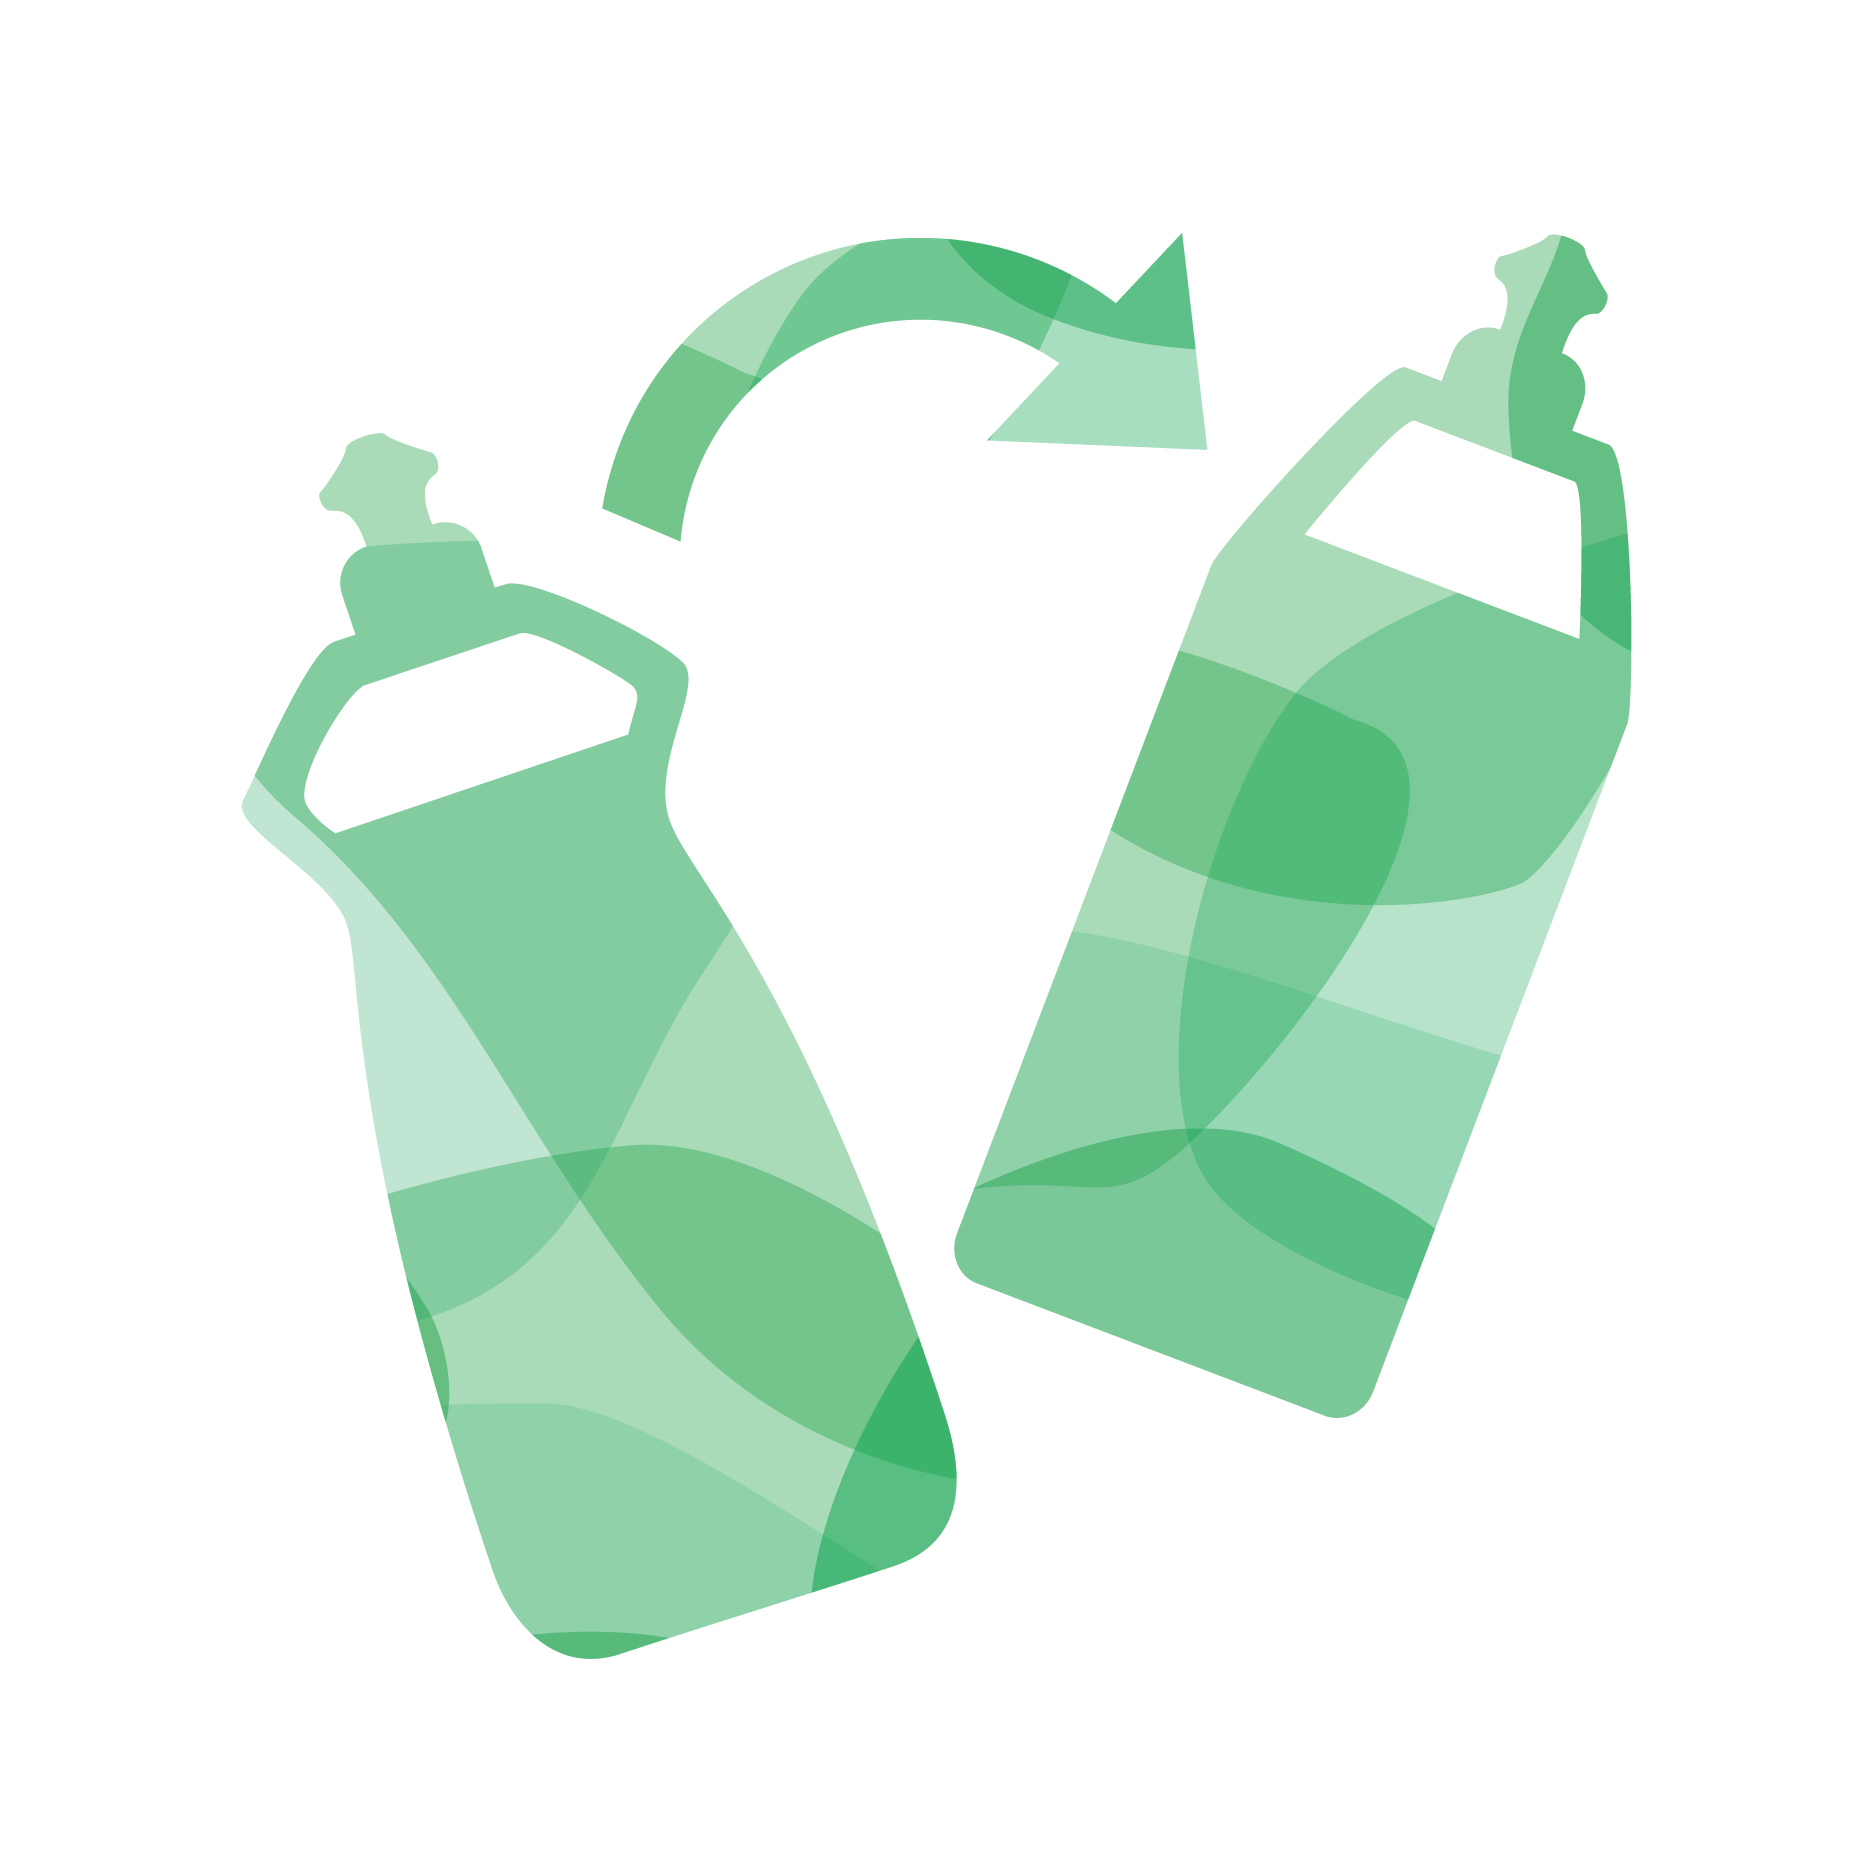 switch from plastic to reusable items illustration